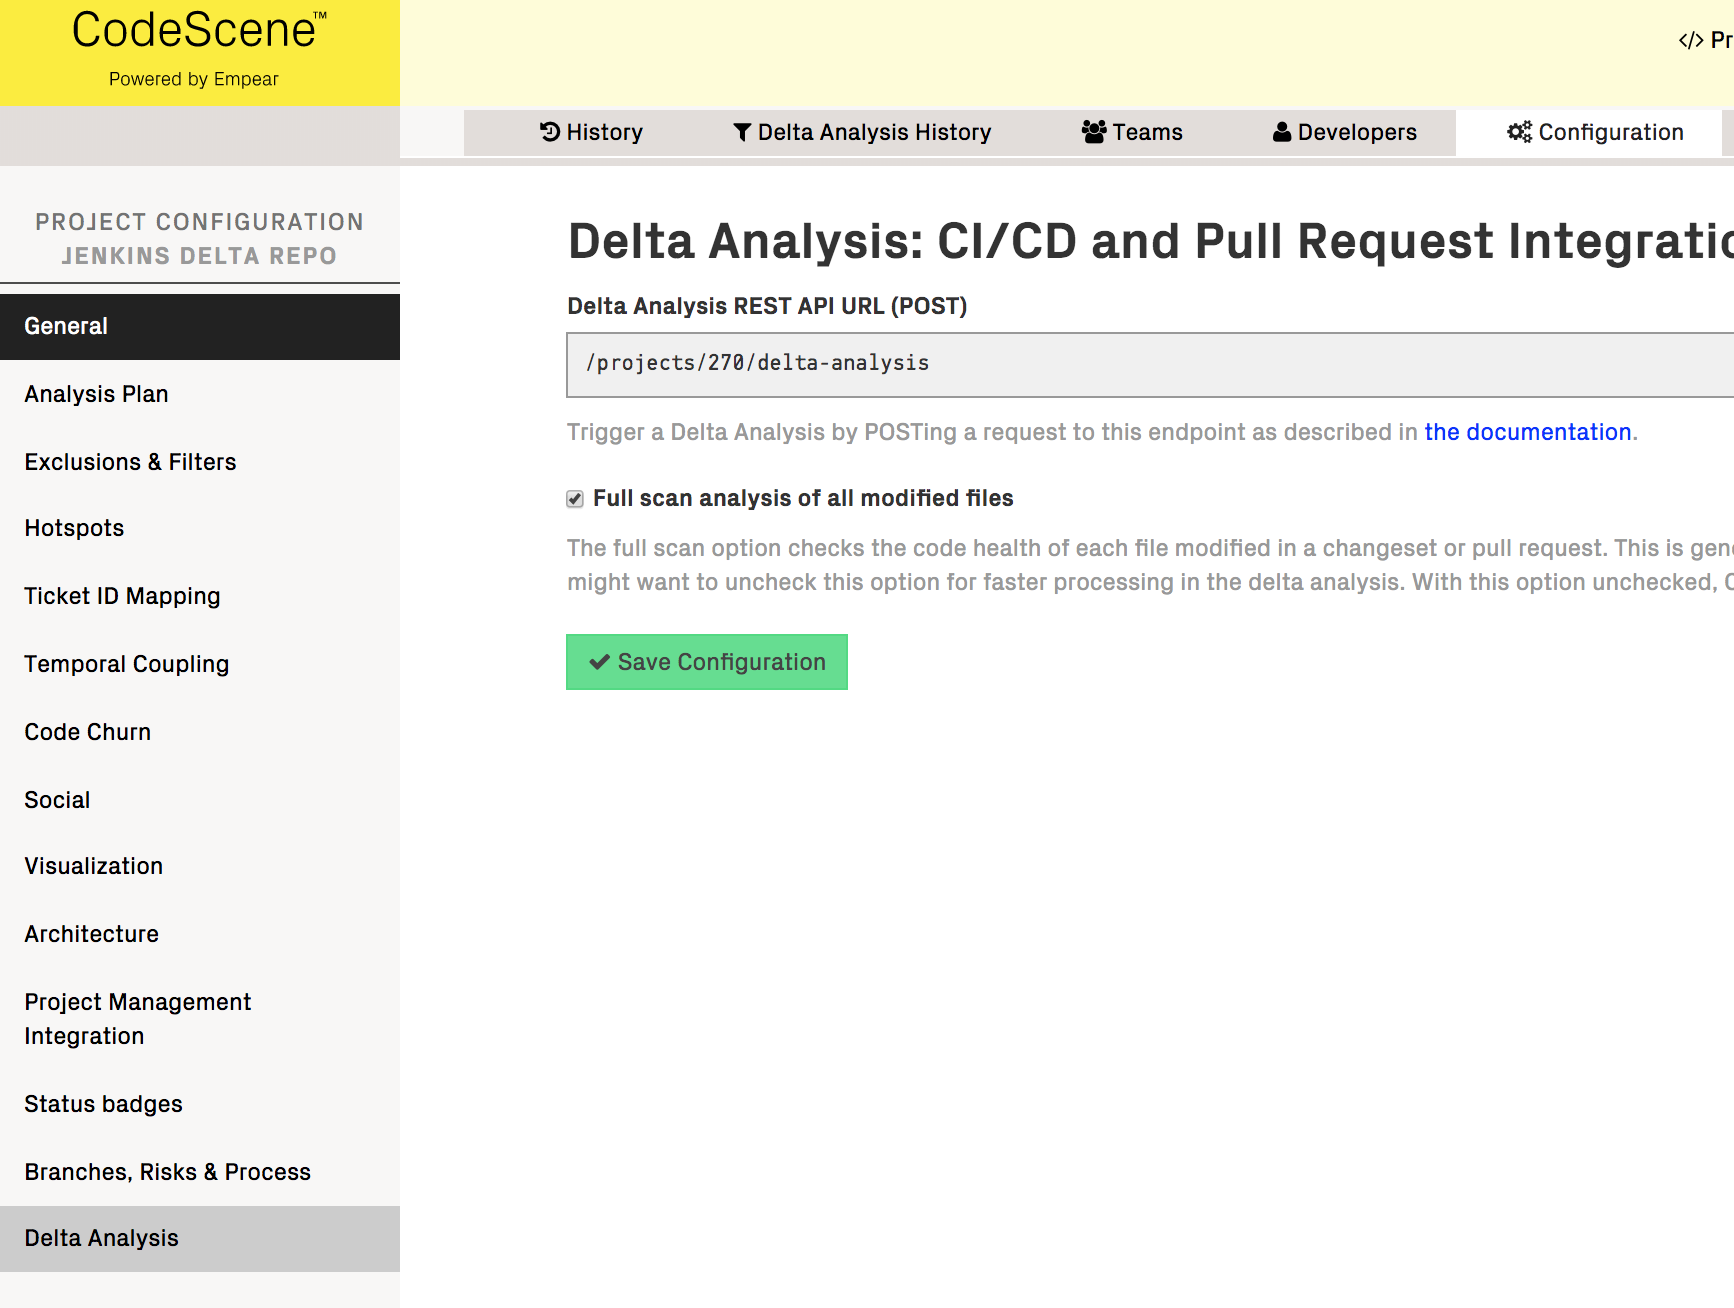 Configure a delta analysis strategy for your project.